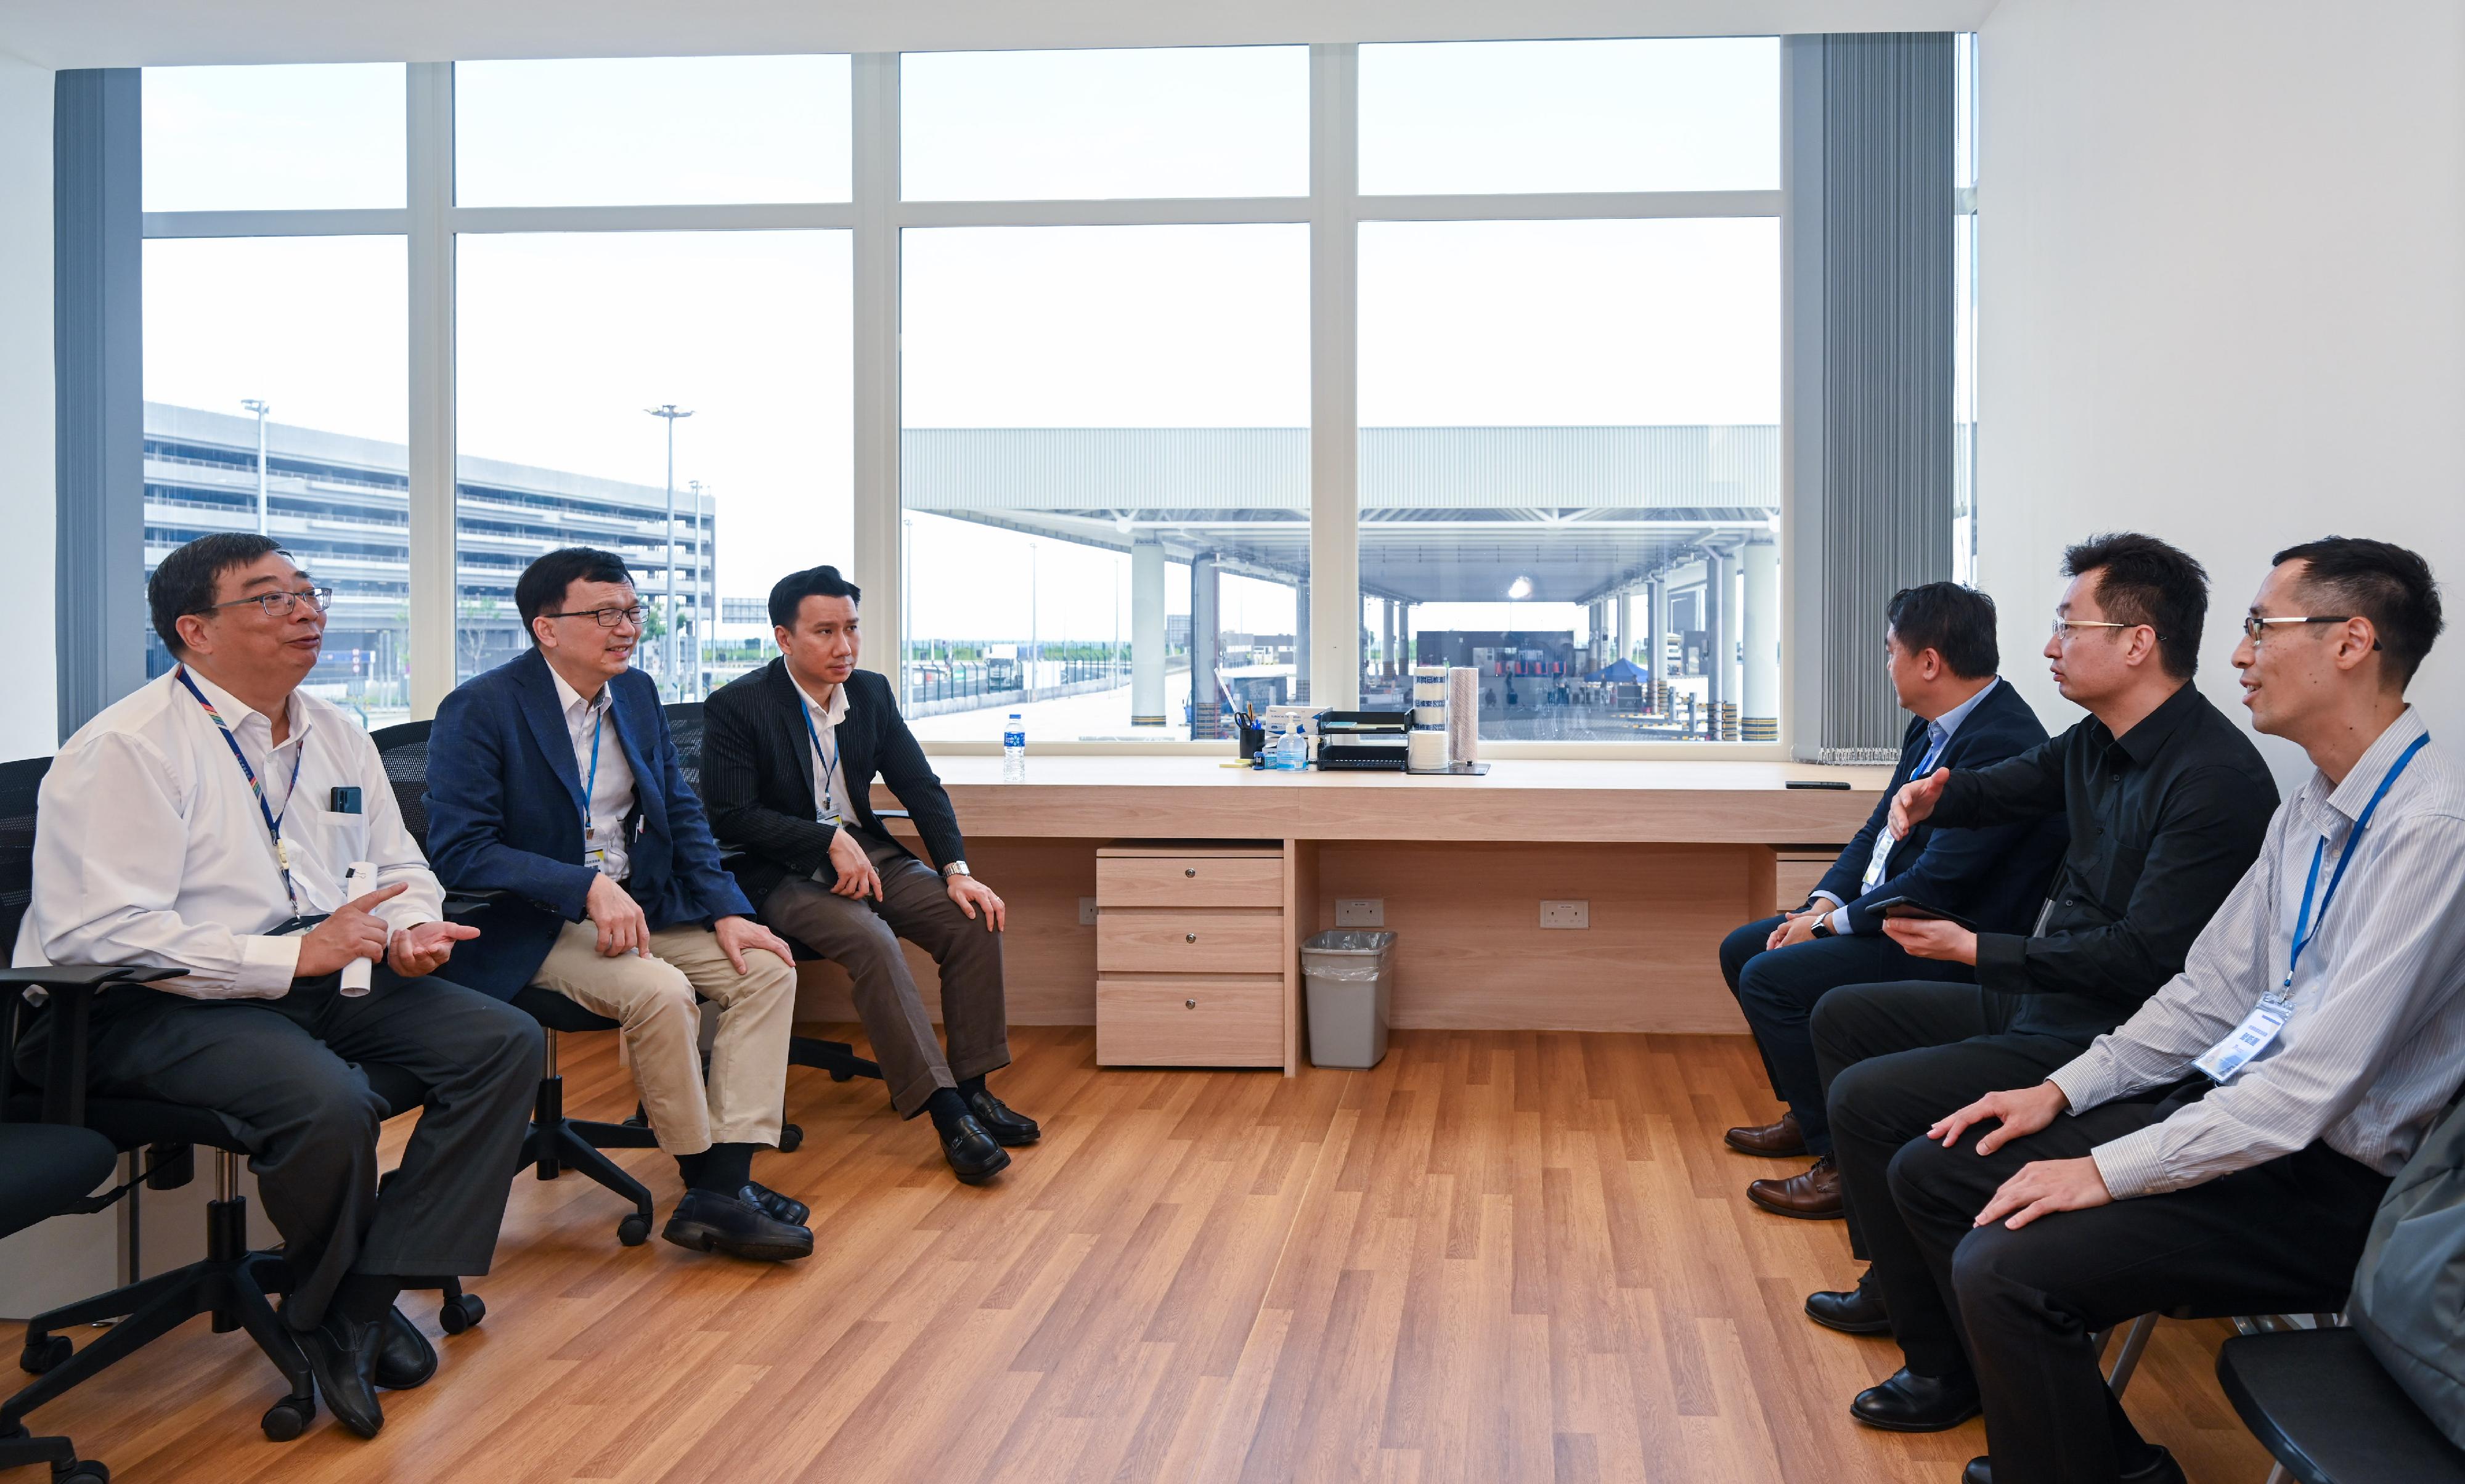 Following the discussions and agreement made between the governments of Hong Kong and Macao, the arrangement for Hong Kong-Macao cross-boundary goods vehicles using the Hong Kong-Zhuhai-Macao Bridge (HZMB) will be implemented. Photo shows the Under Secretary for Transport and Logistics, Mr Liu Chun-san (second left), the Subdirector of the Macao Transport Bureau, Mr Chiang Ngoc Vai (first left), the Principal Assistant Secretary for Transport and Logistics, Mr Percy Leung (first right), and the Assistant Commissioner for Transport (New Territories), Mr Patrick Wong (third right), exchanging views on the HZMB Macao Port transfer facility as well as the operational procedures for Hong Kong goods vehicles travelling to Macao.